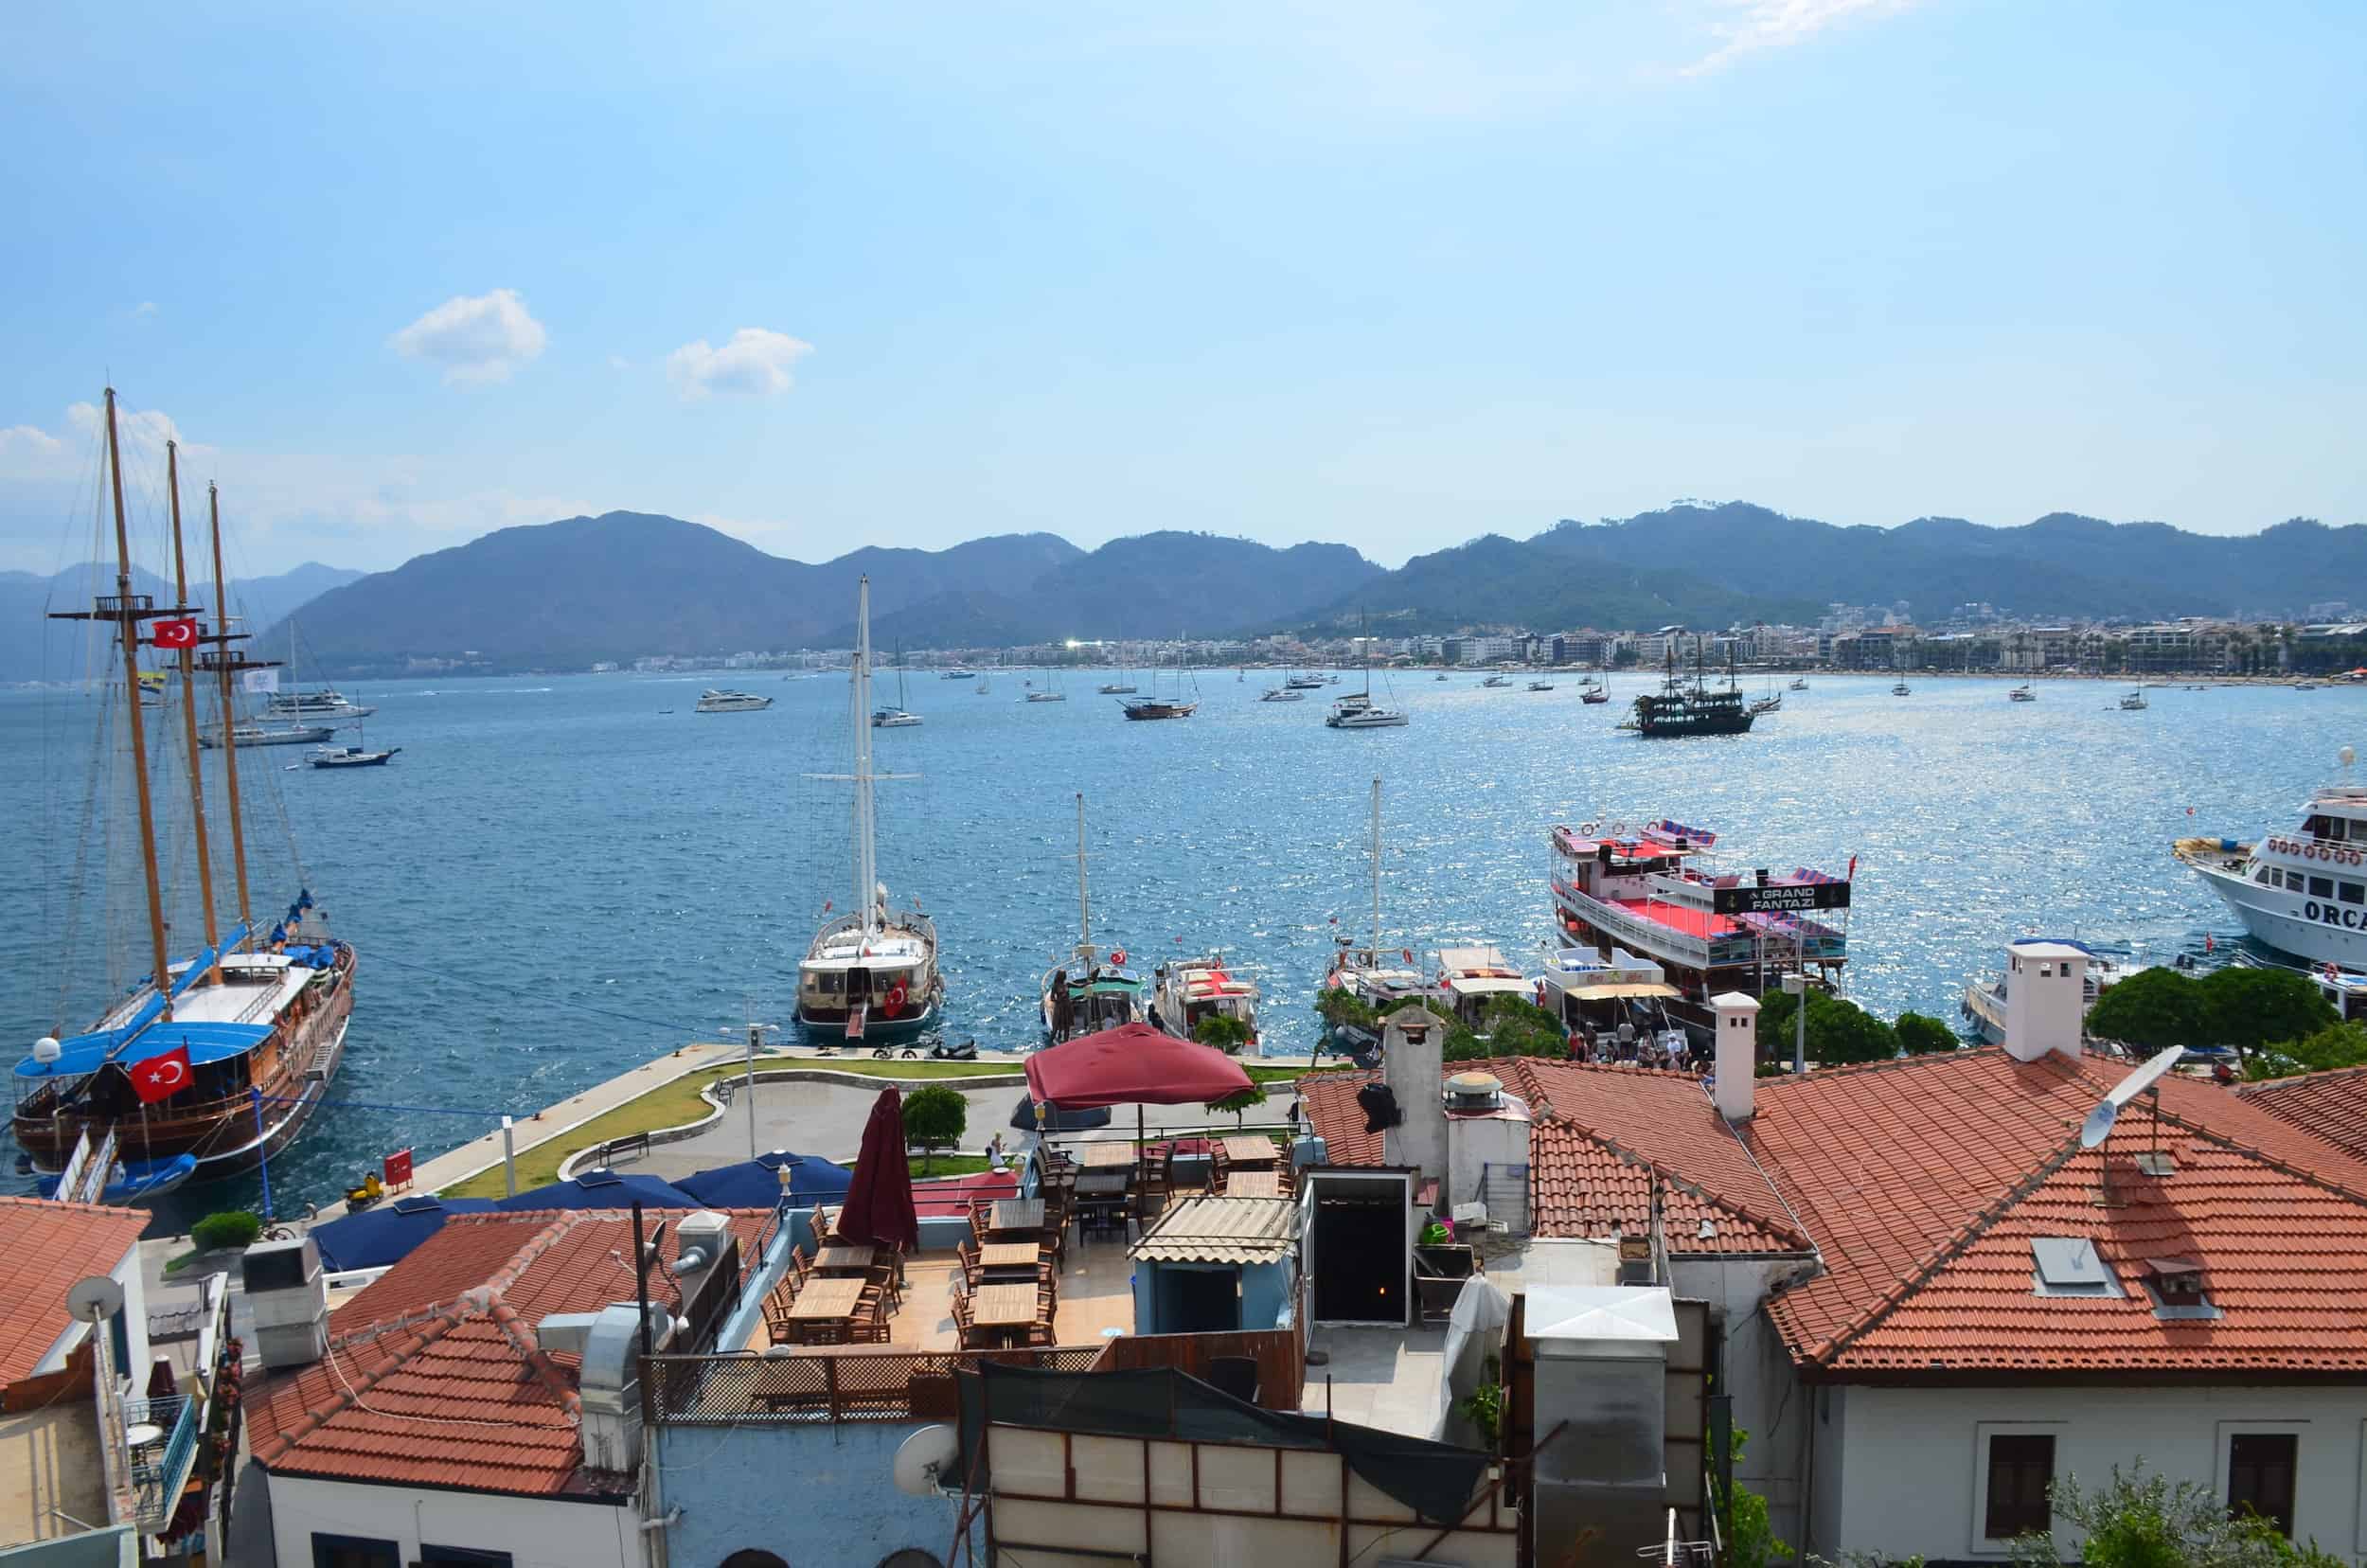 View of the bay from Marmaris Castle in Marmaris, Turkey